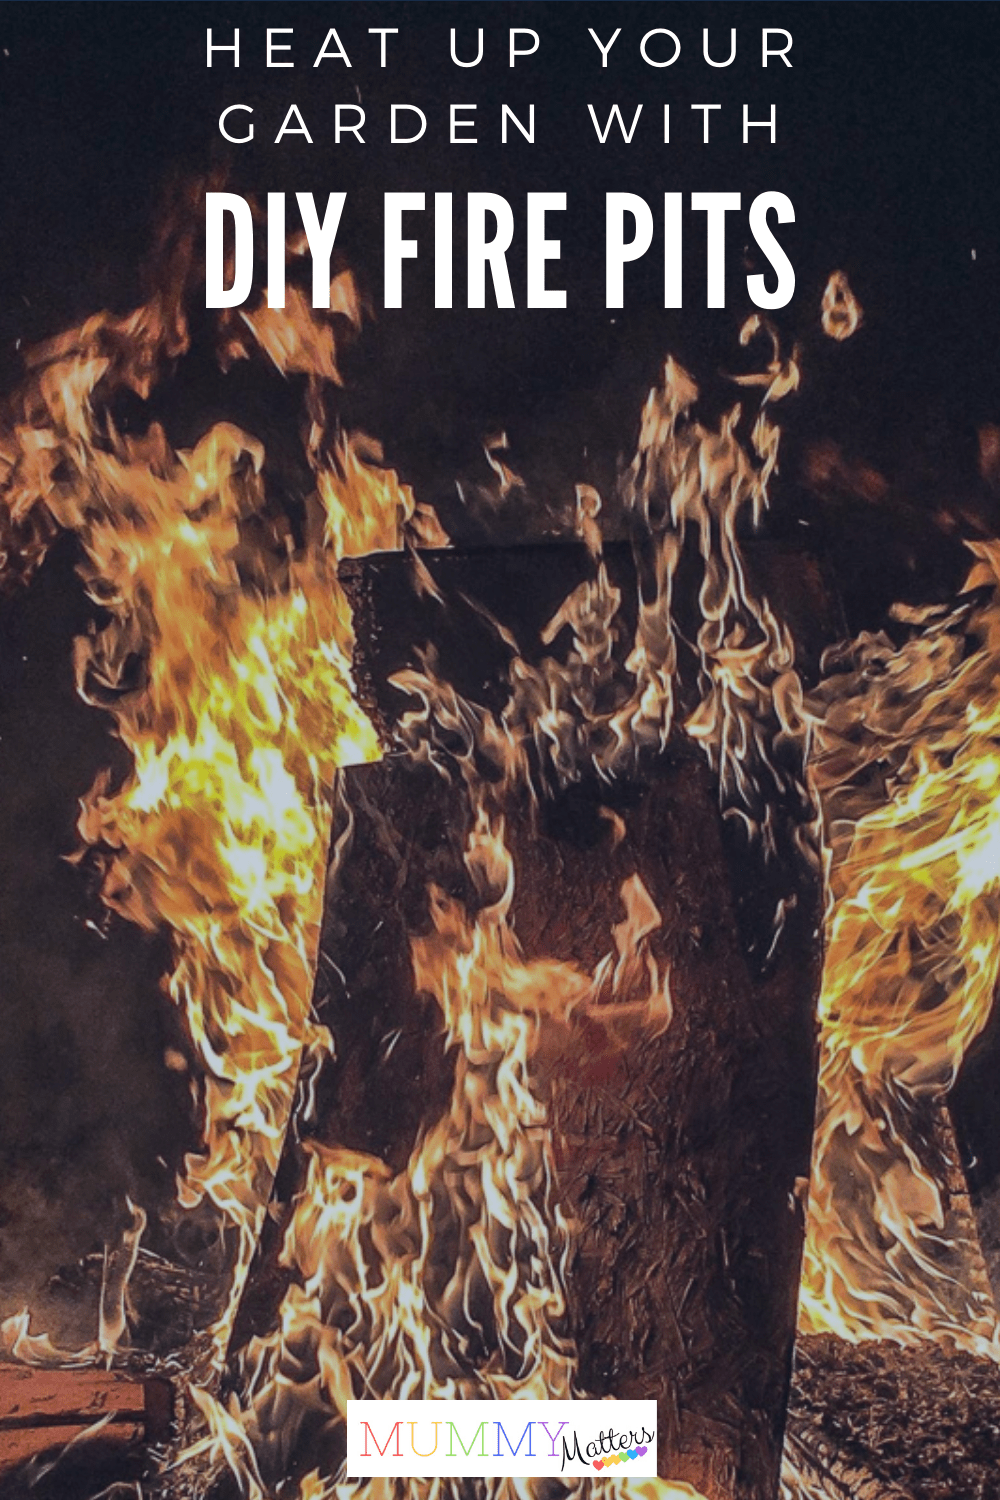 DIY fire pits don't have to be complicated or dangerous. Here some different ways you can approach making one, and some tips on how to keep safe.